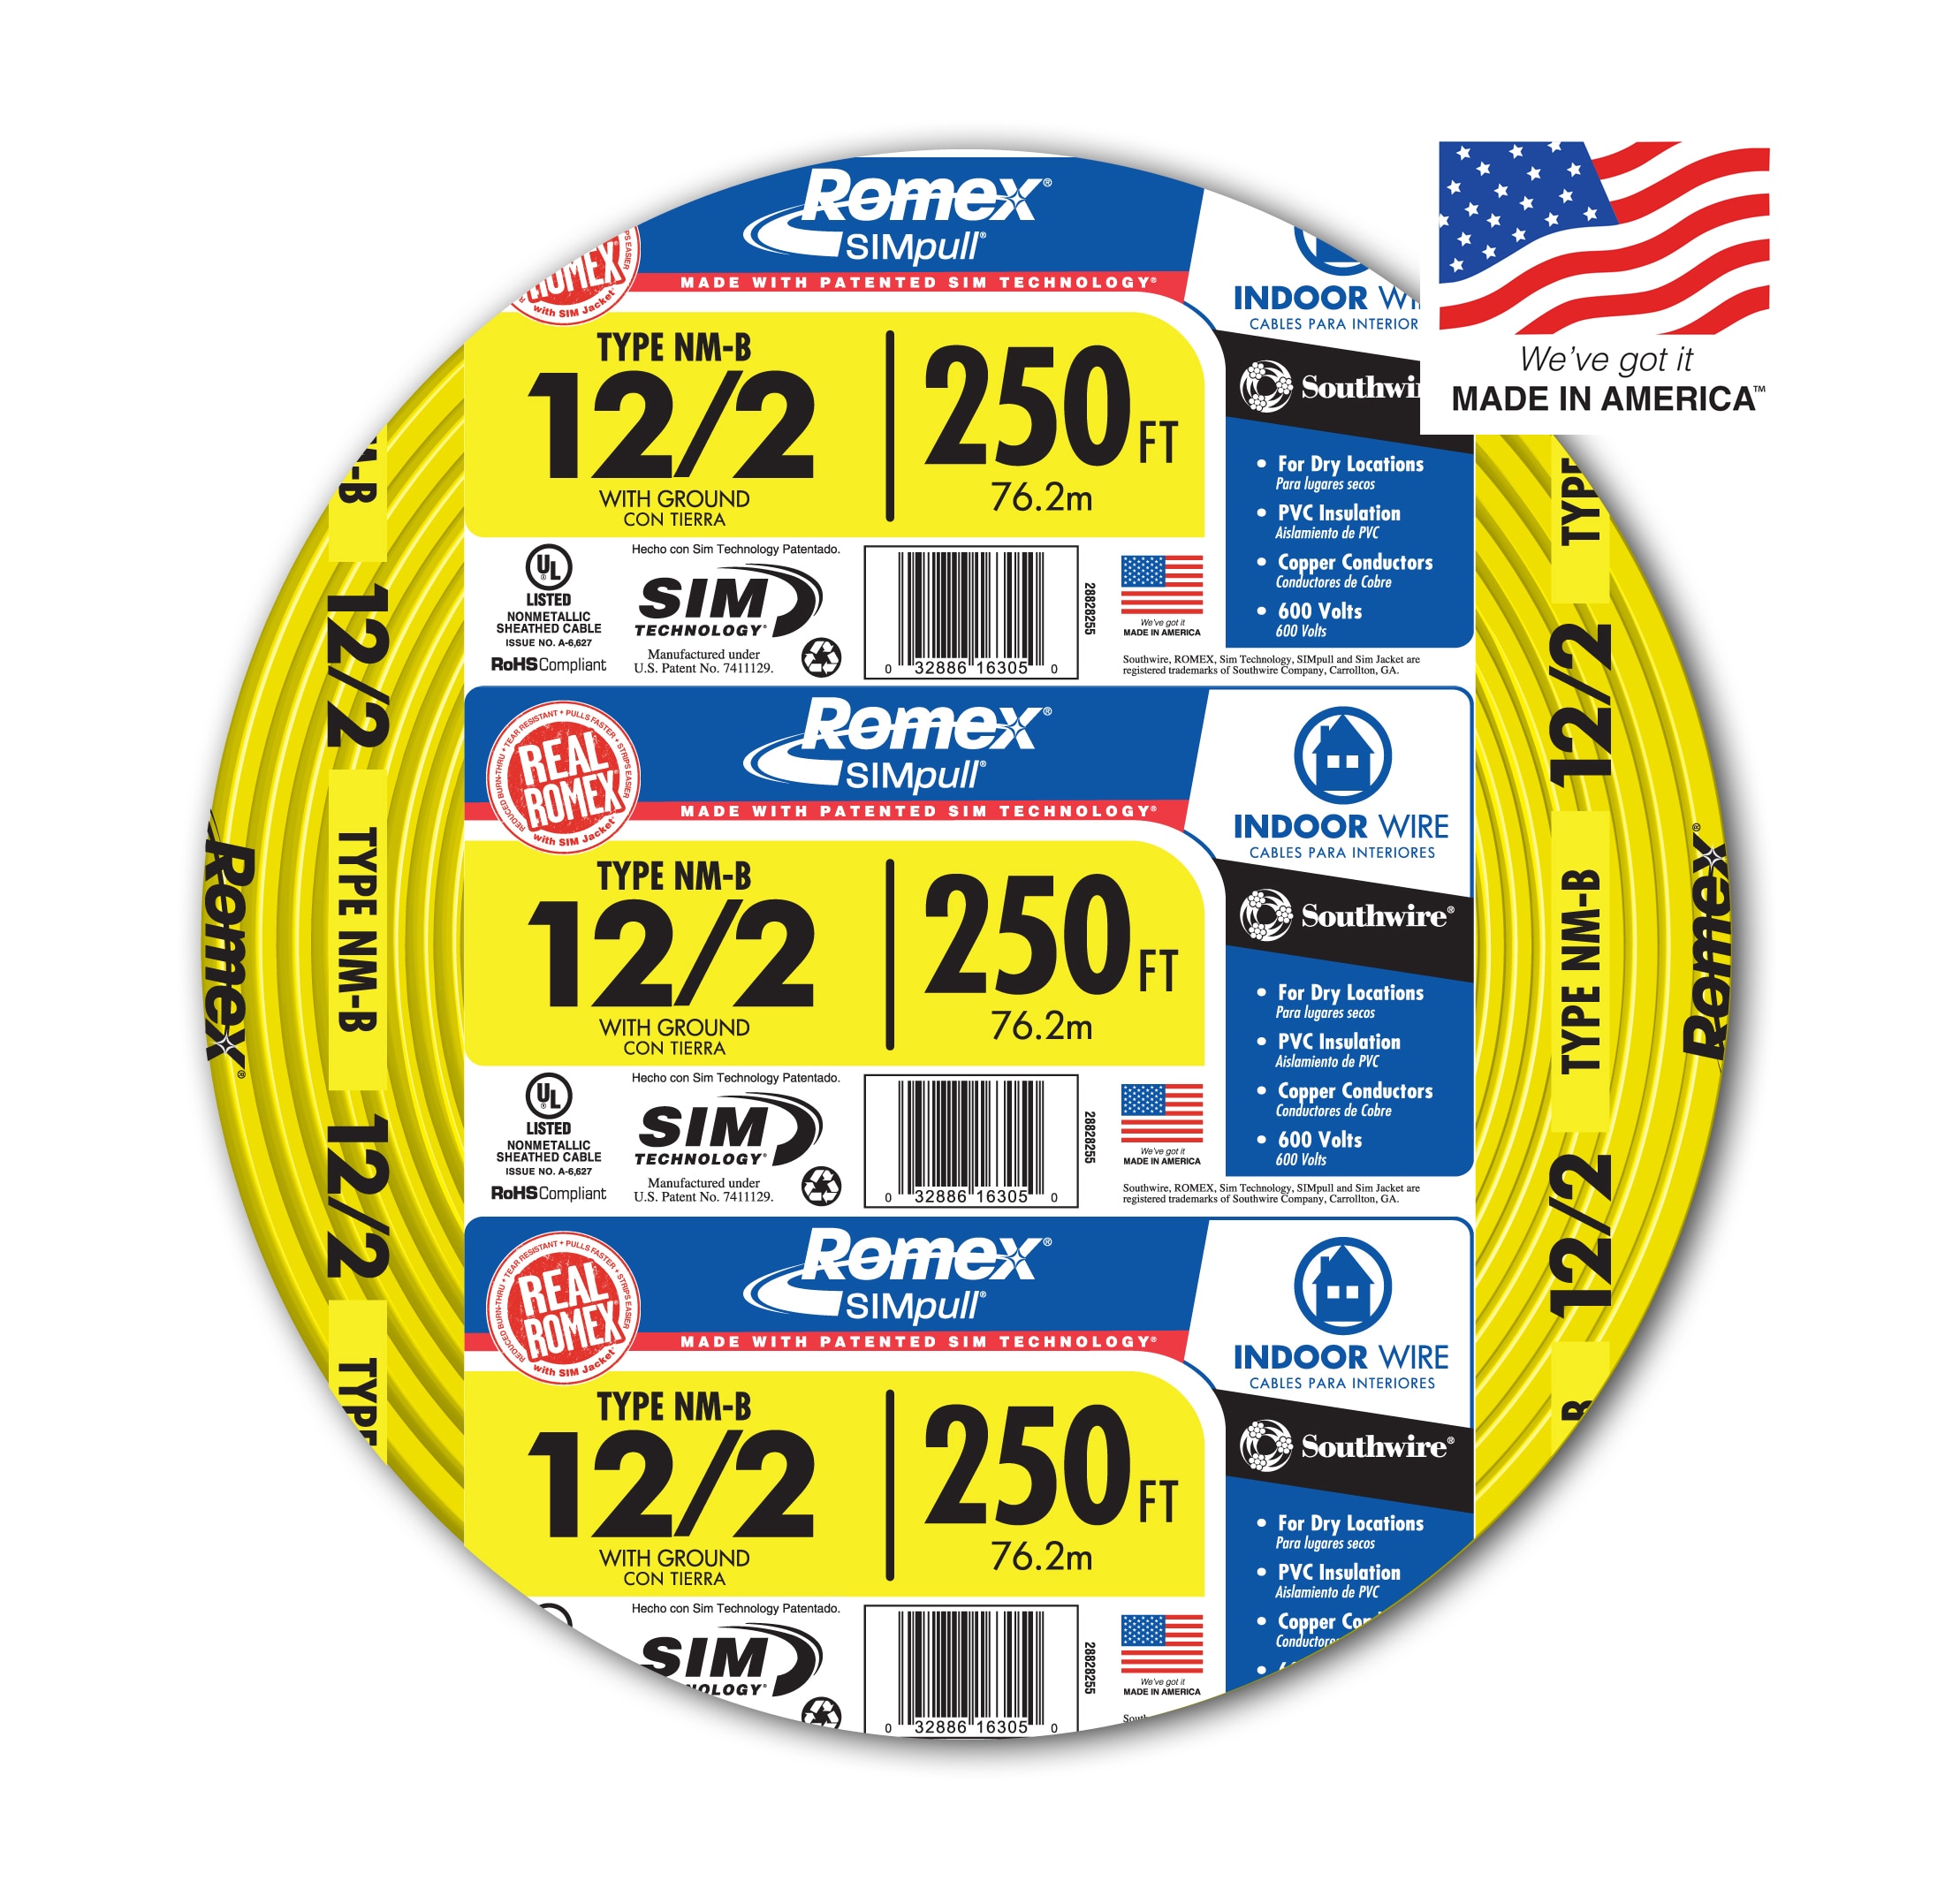 12/2 W/GROUND ROMEX INDOOR ELECTRICAL WIRE 100' FEET ALL LENGTHS AVAILABLE 